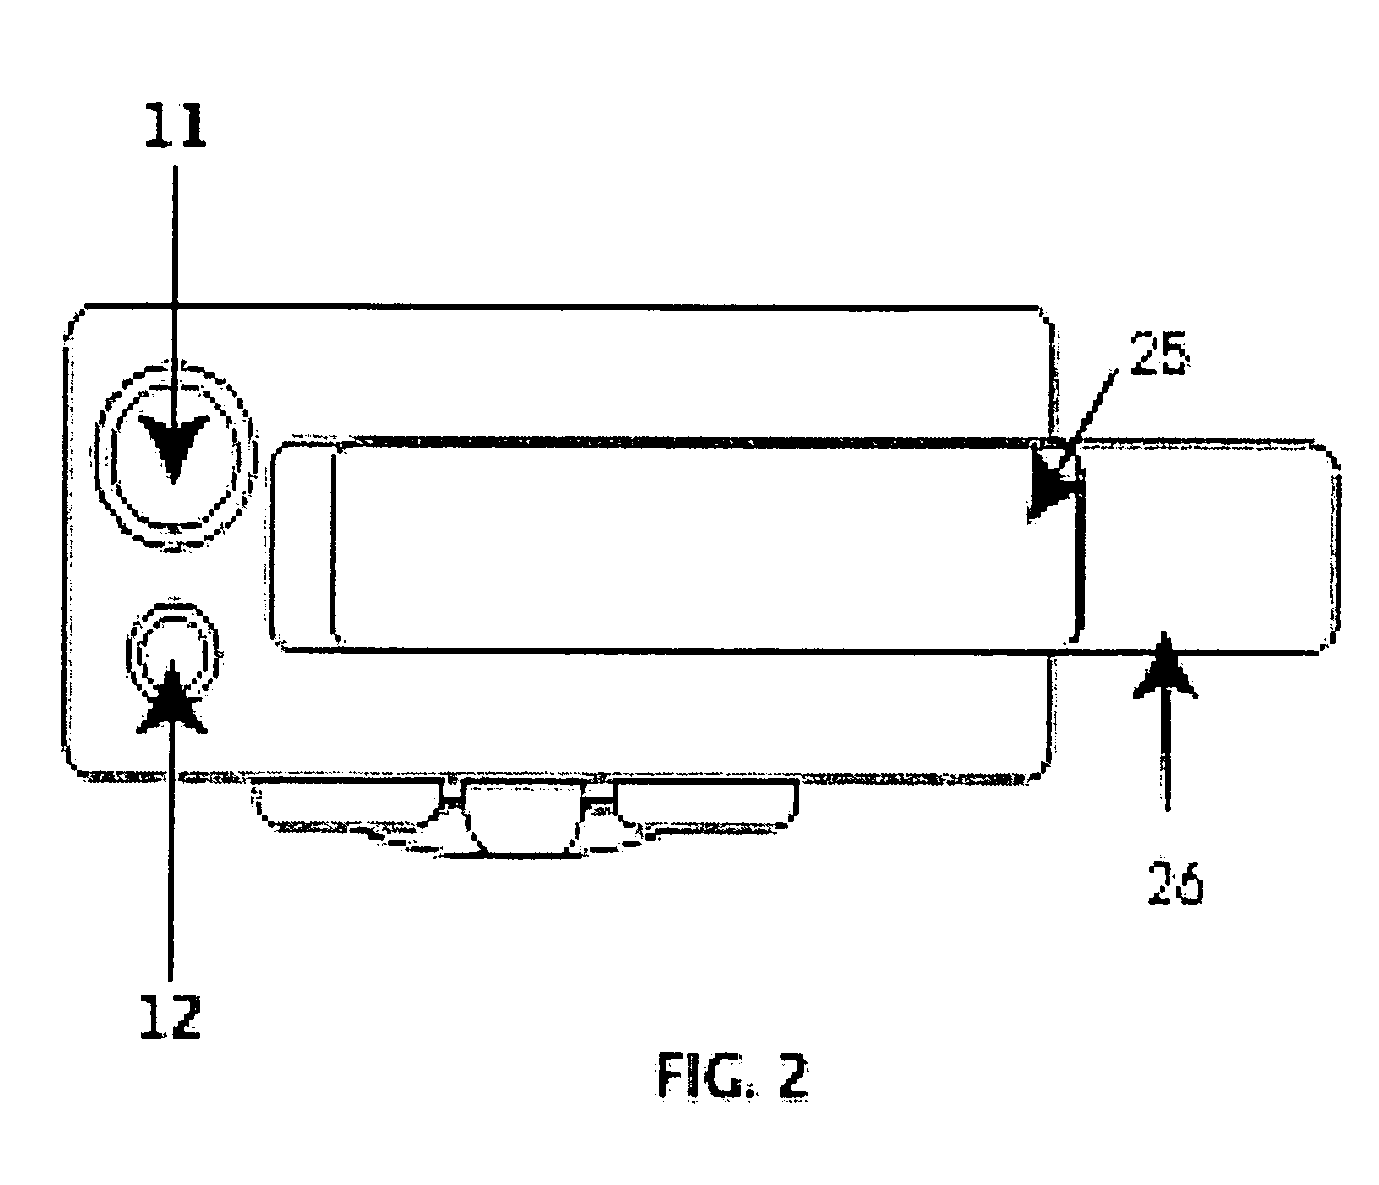 Instrument for non-contact infrared temperature measurement having current clamp meter functions